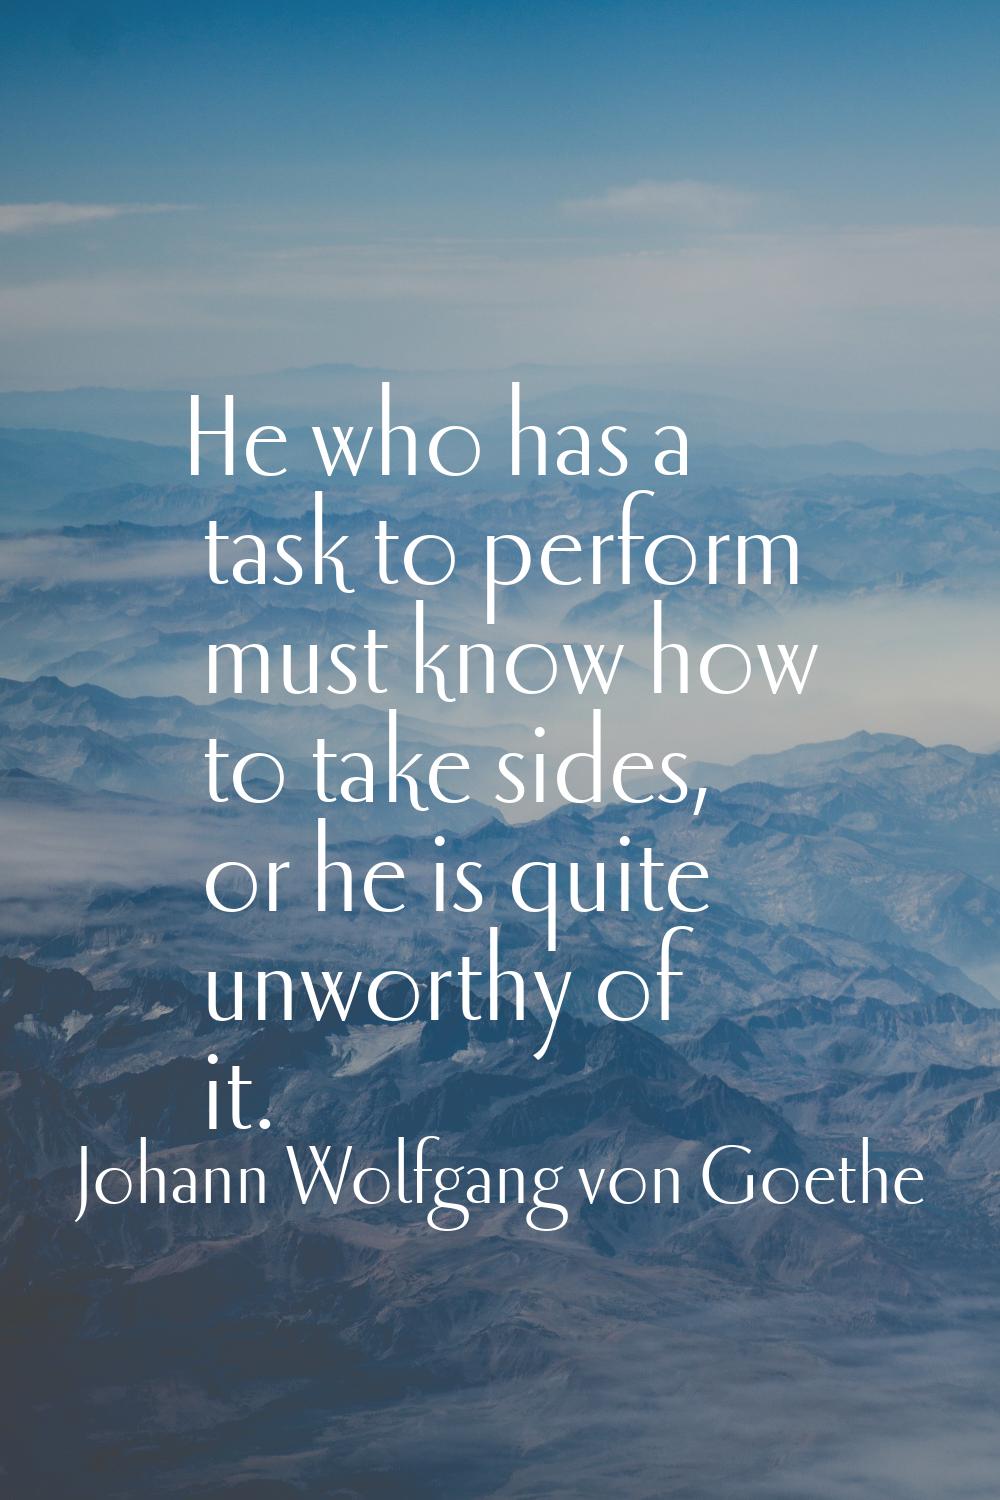 He who has a task to perform must know how to take sides, or he is quite unworthy of it.